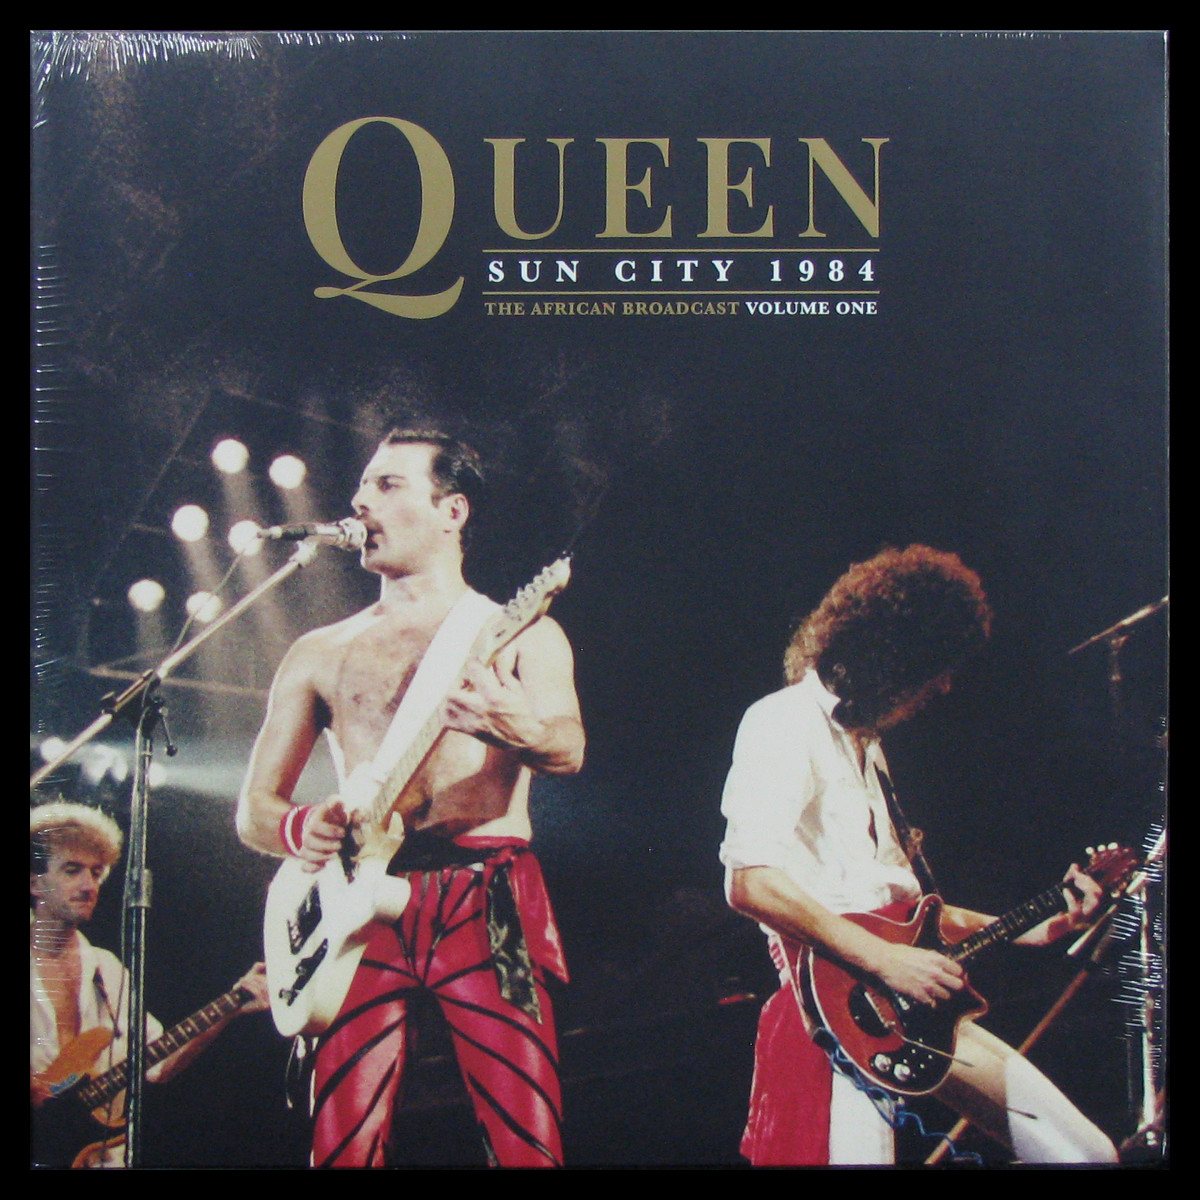 LP Queen — Sun City 1984 - The African Broadcast Volume One фото